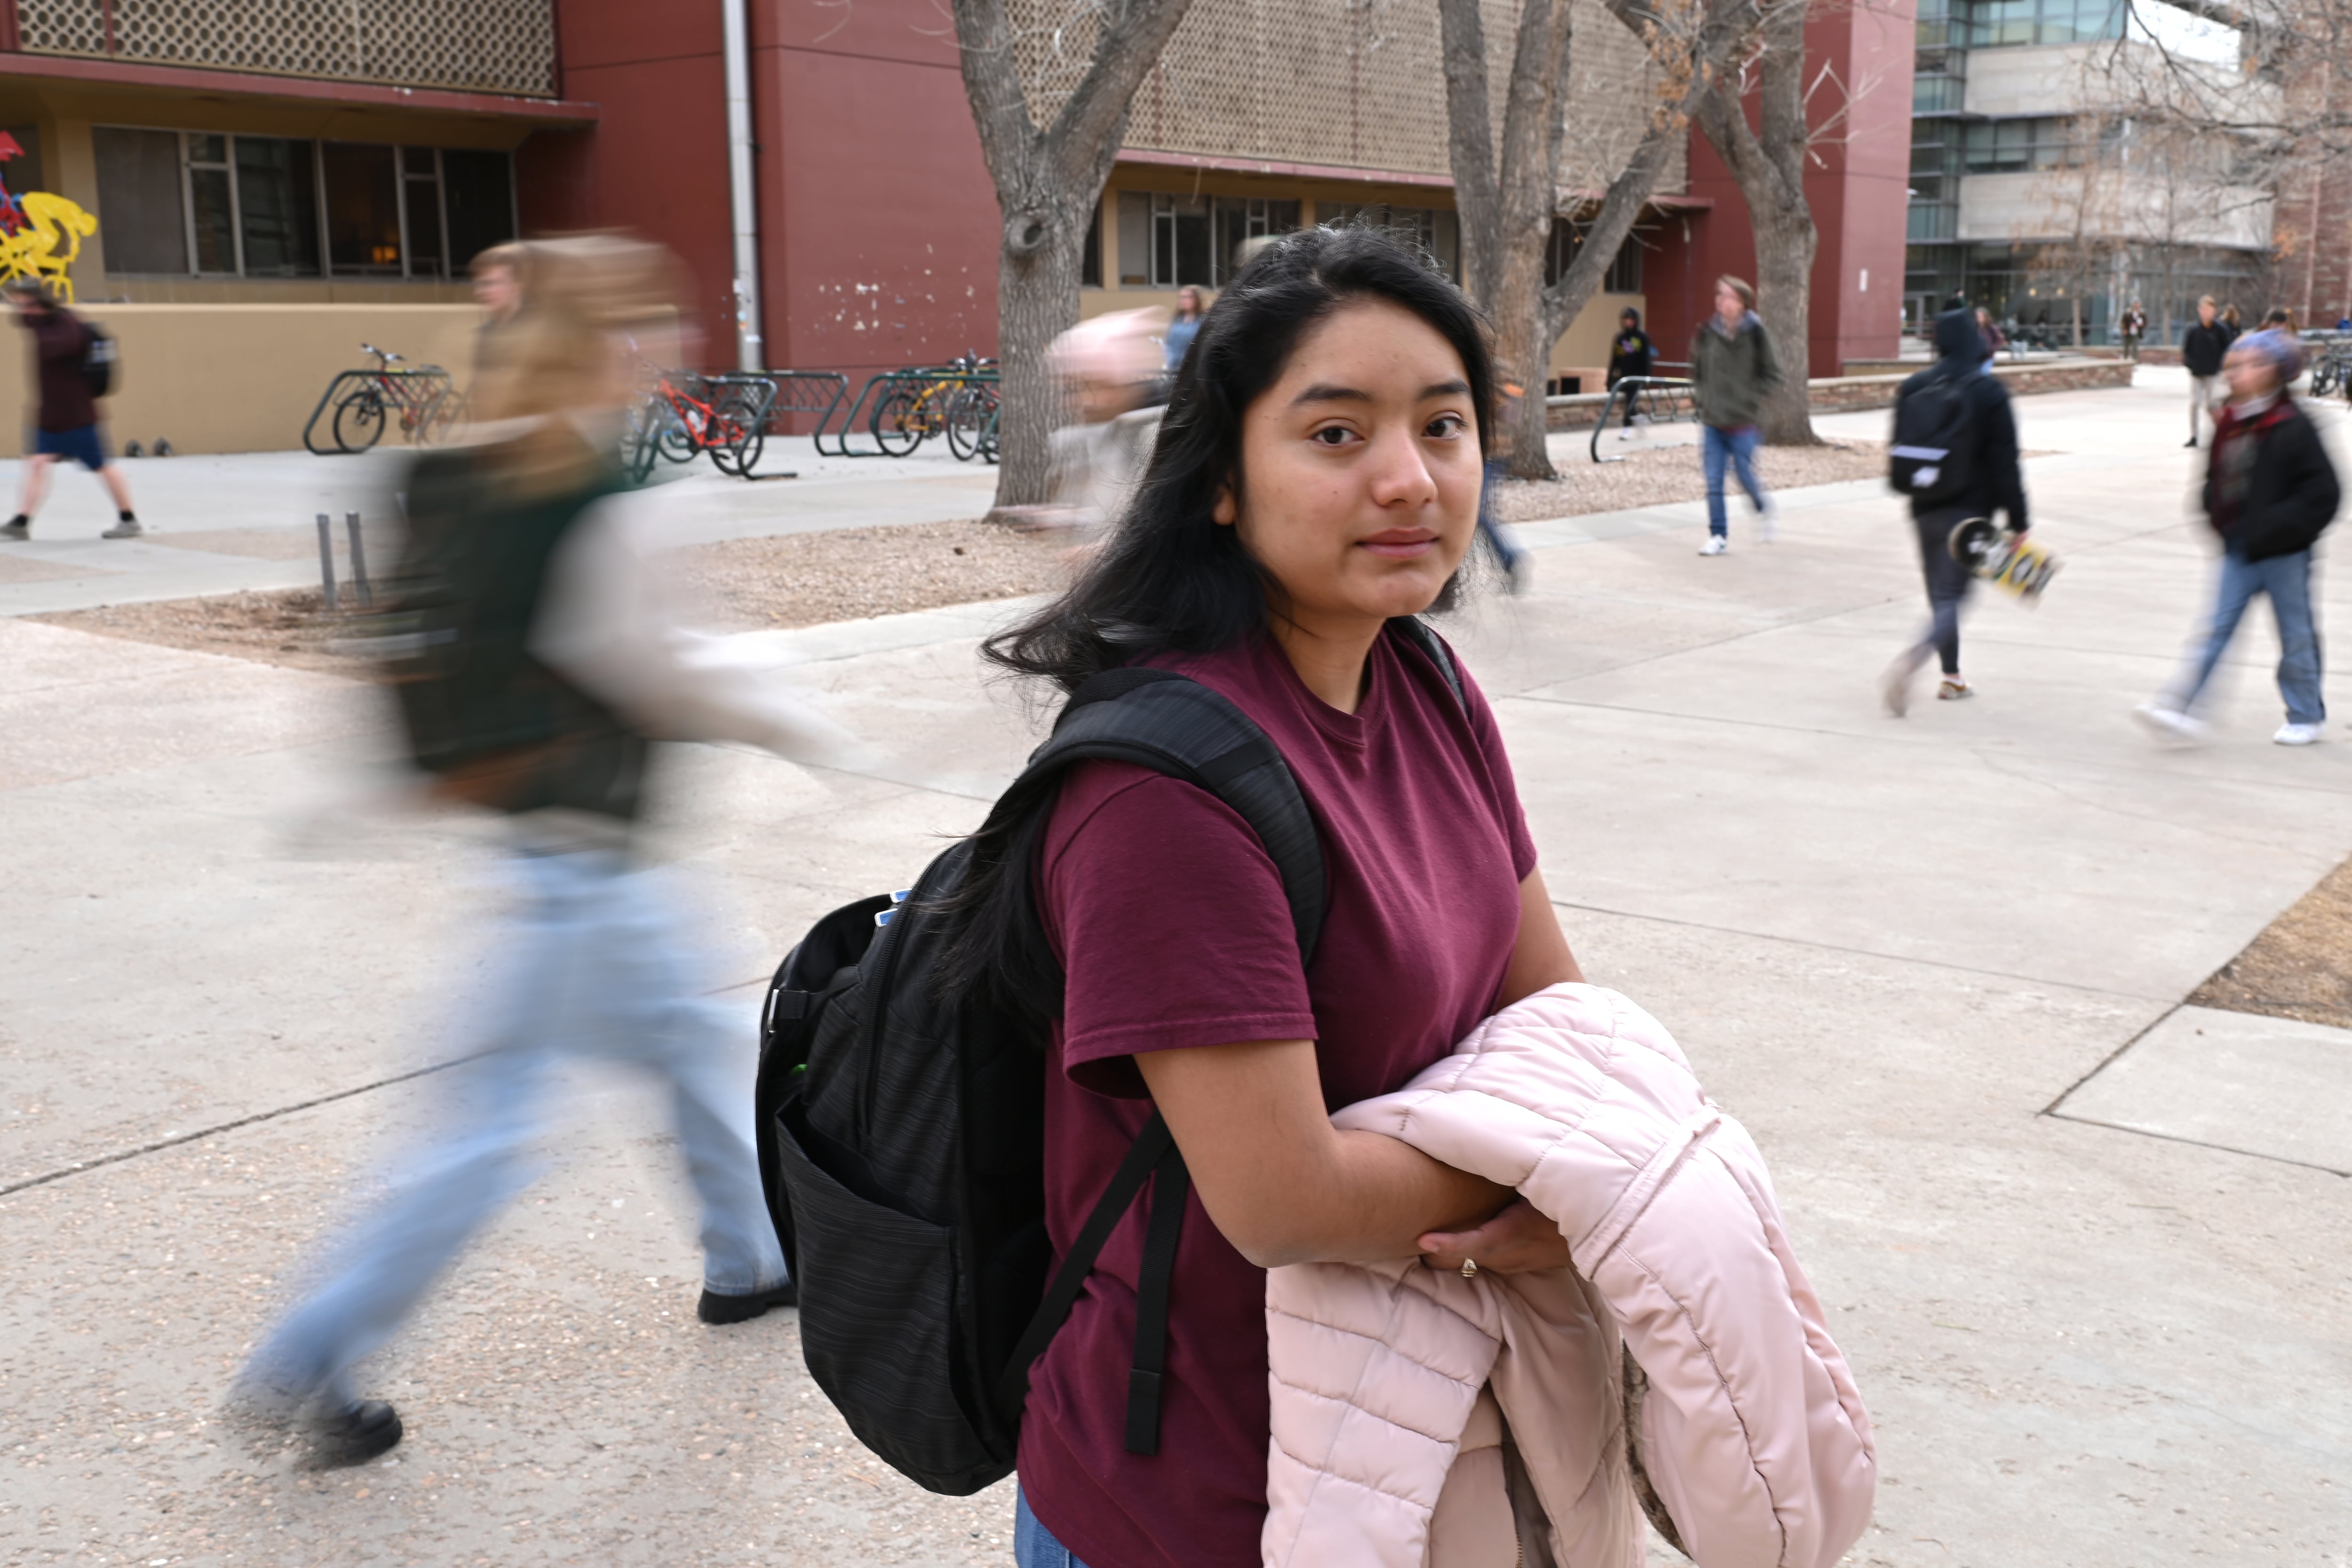 A young woman with dark hair holds a pink jacket and looks at the camera. She is standing in front of a college building and there are other blurred people walking through campus behind her.